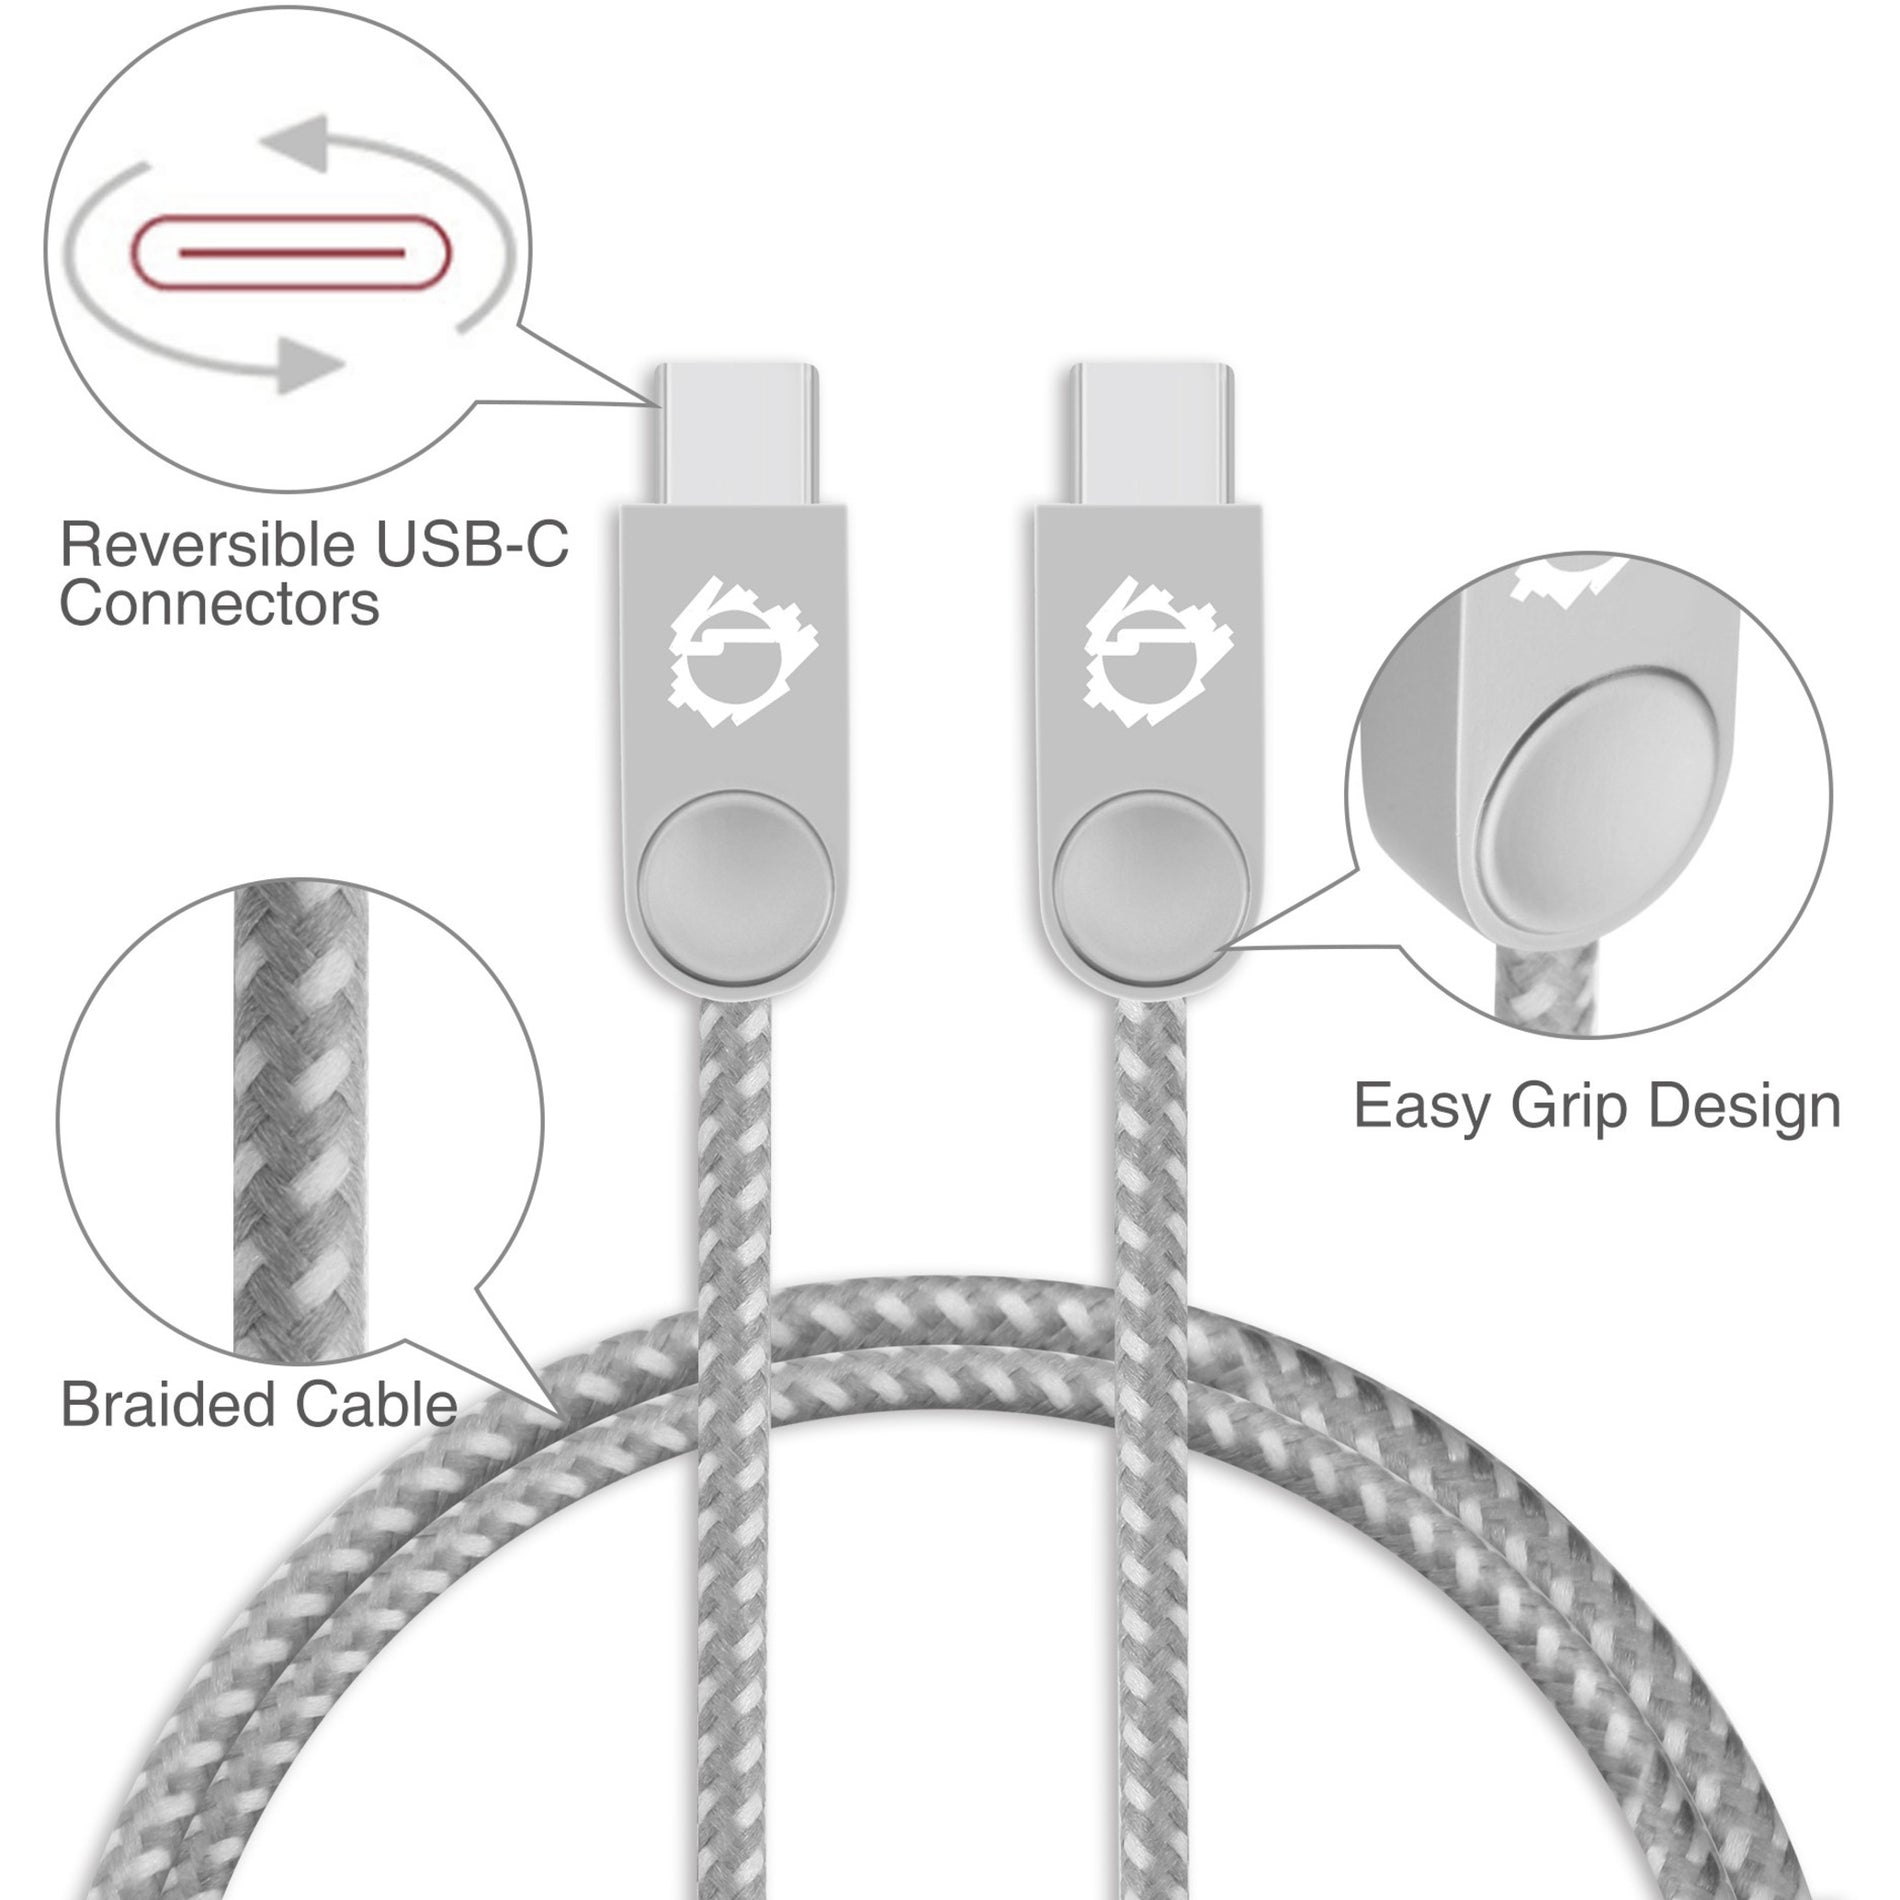 SIIG CB-US0P11-S1 Zinc Alloy USB-C to USB-C Charging & Sync Braided Cable - 1.65ft, 2-Pack, Durable and Reversible